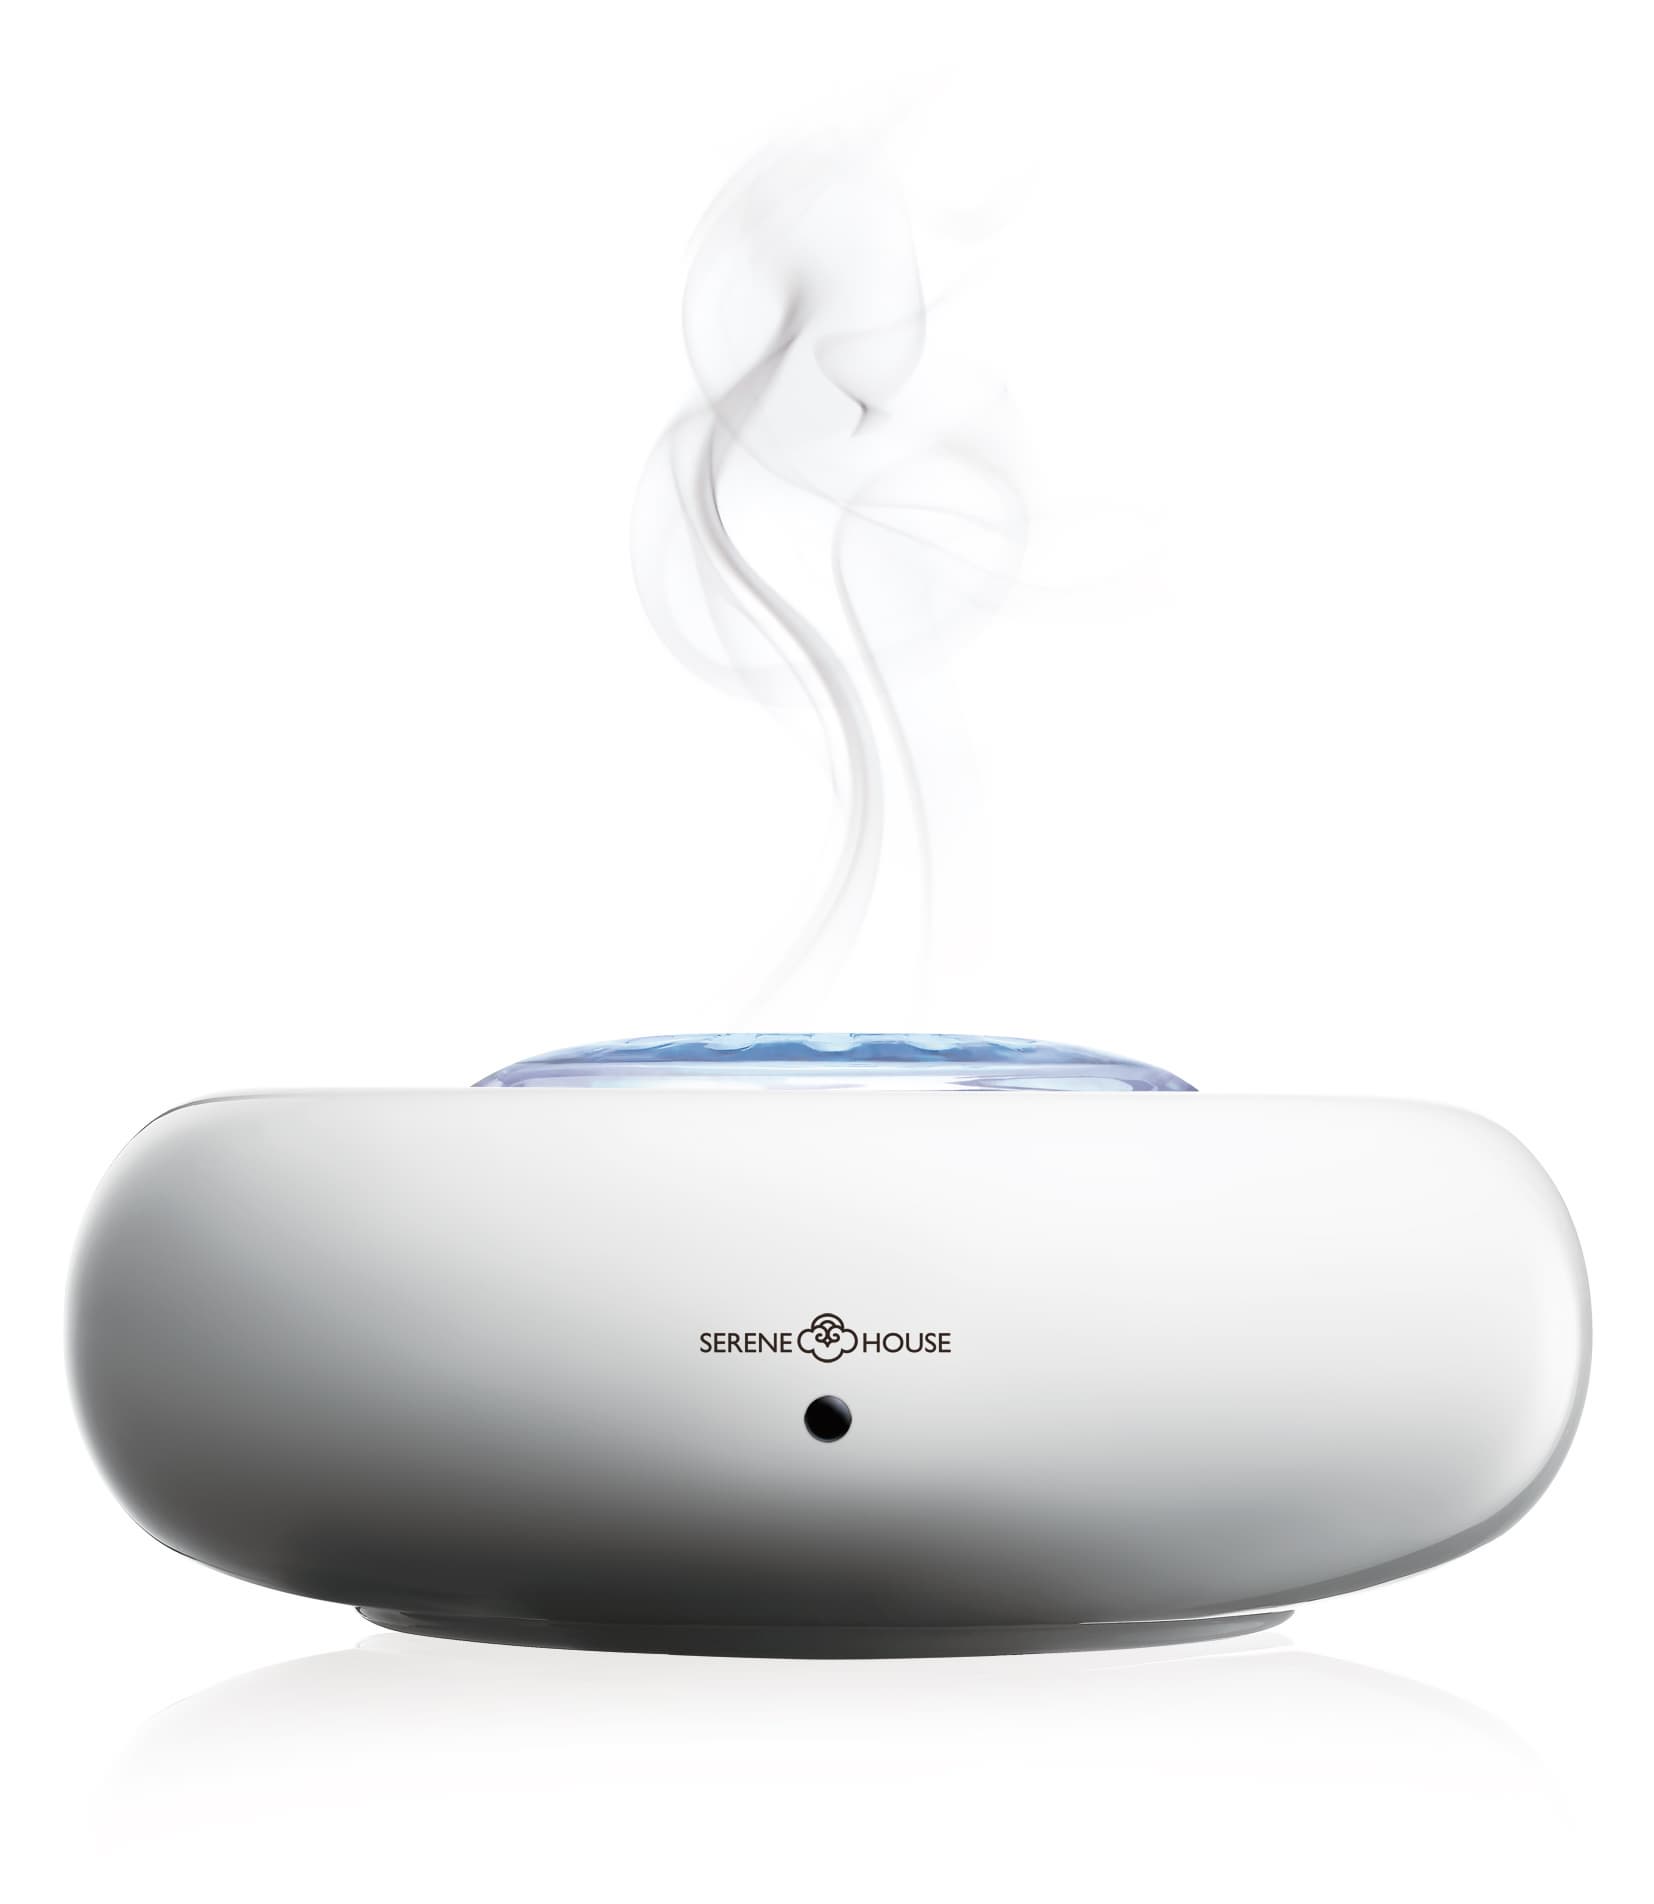 Ultrasonic Home Fragrance Essential Oil Aroma Diffuser